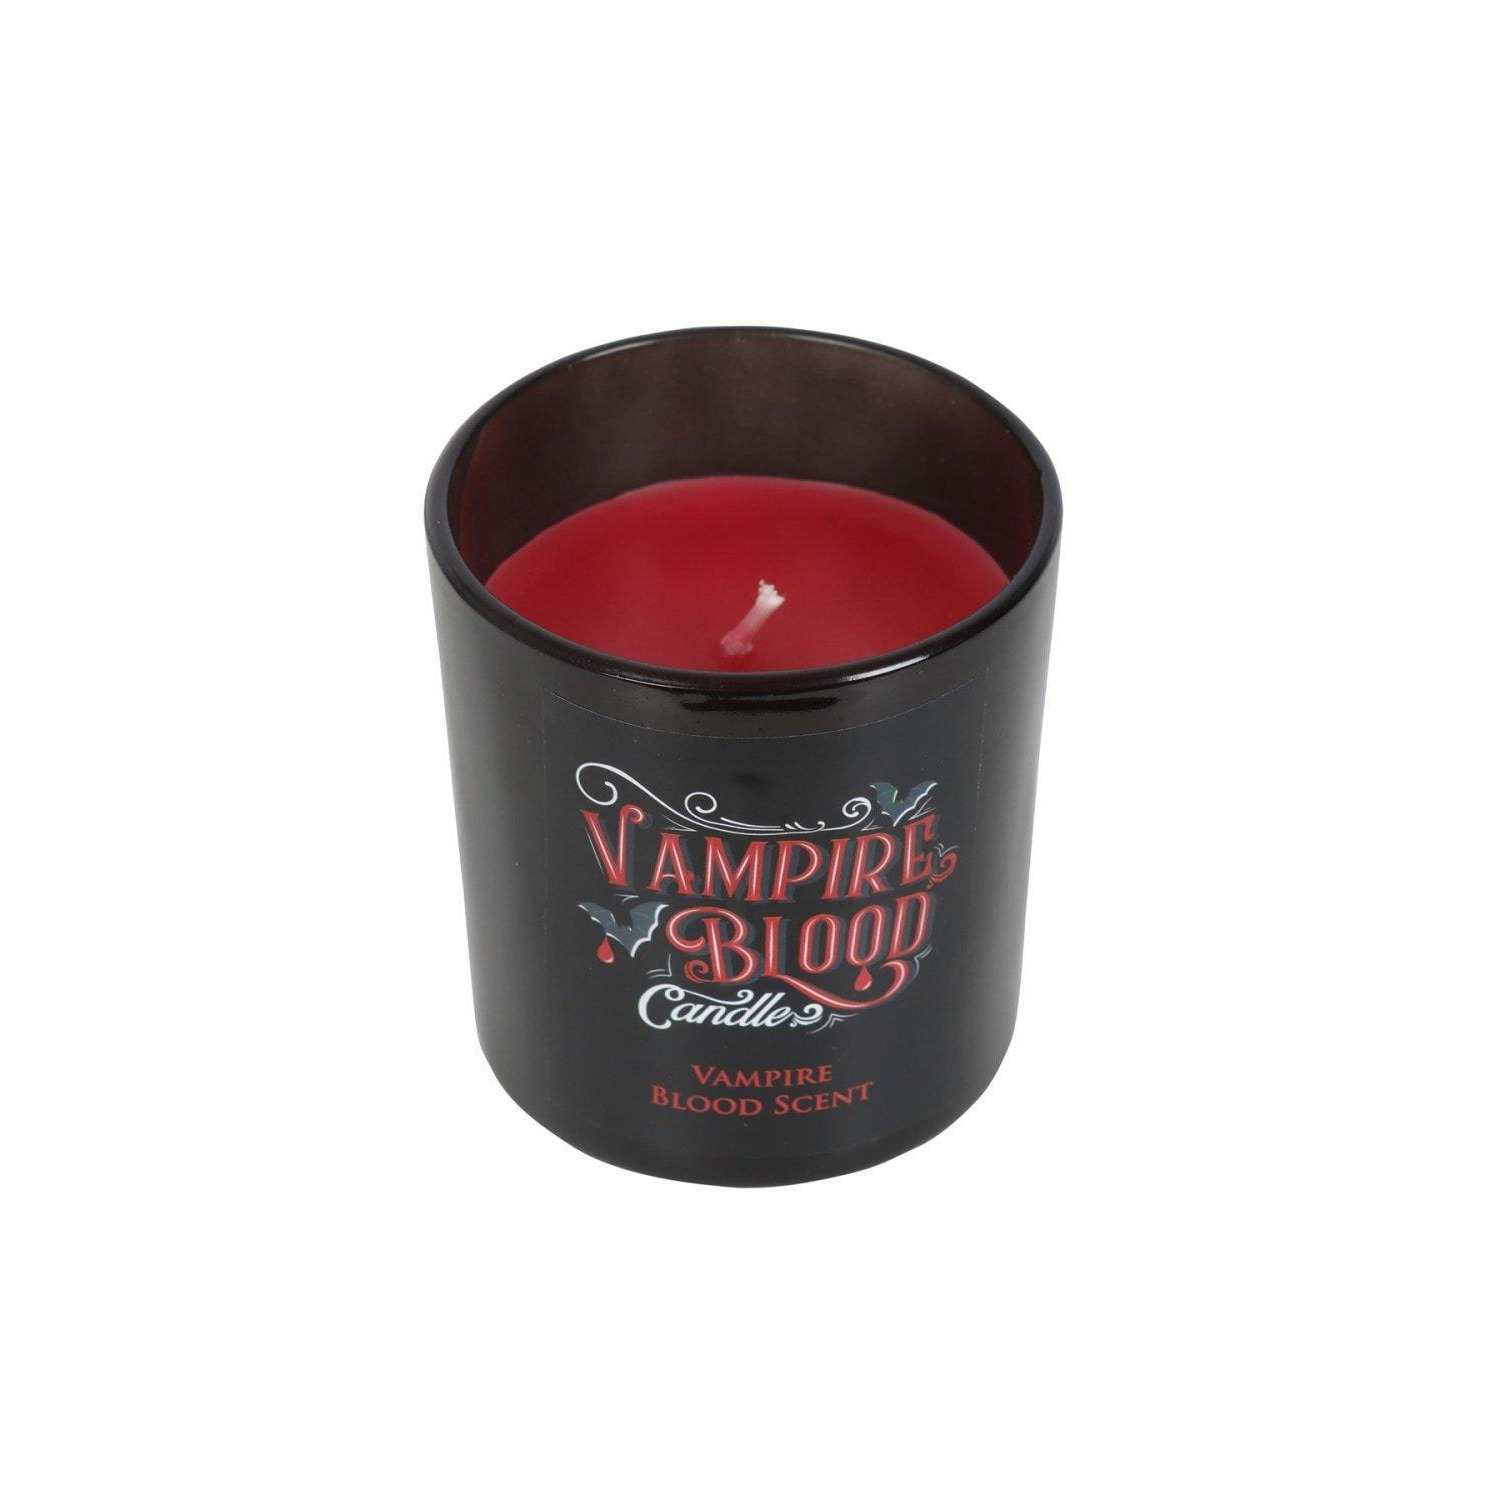 Vampire Blood Scented Candle - image 1